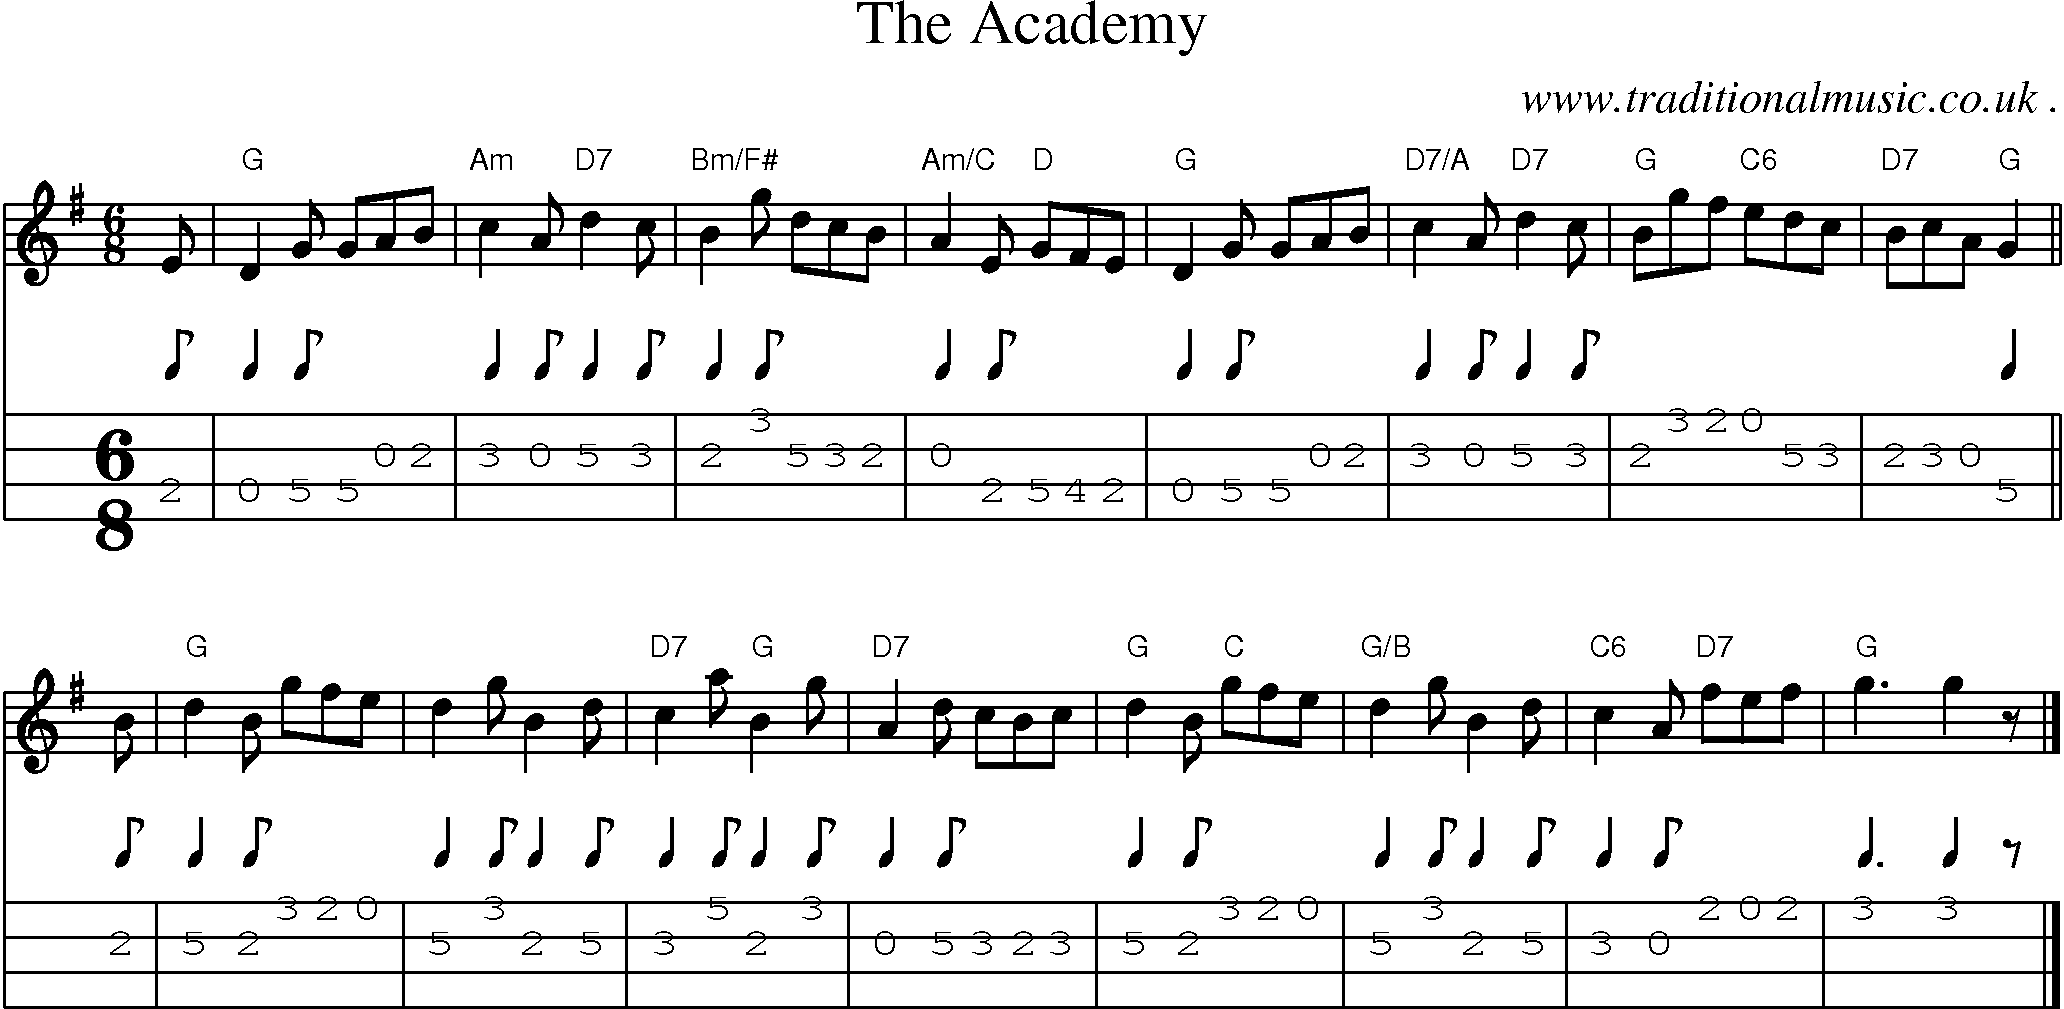 Sheet-music  score, Chords and Mandolin Tabs for The Academy